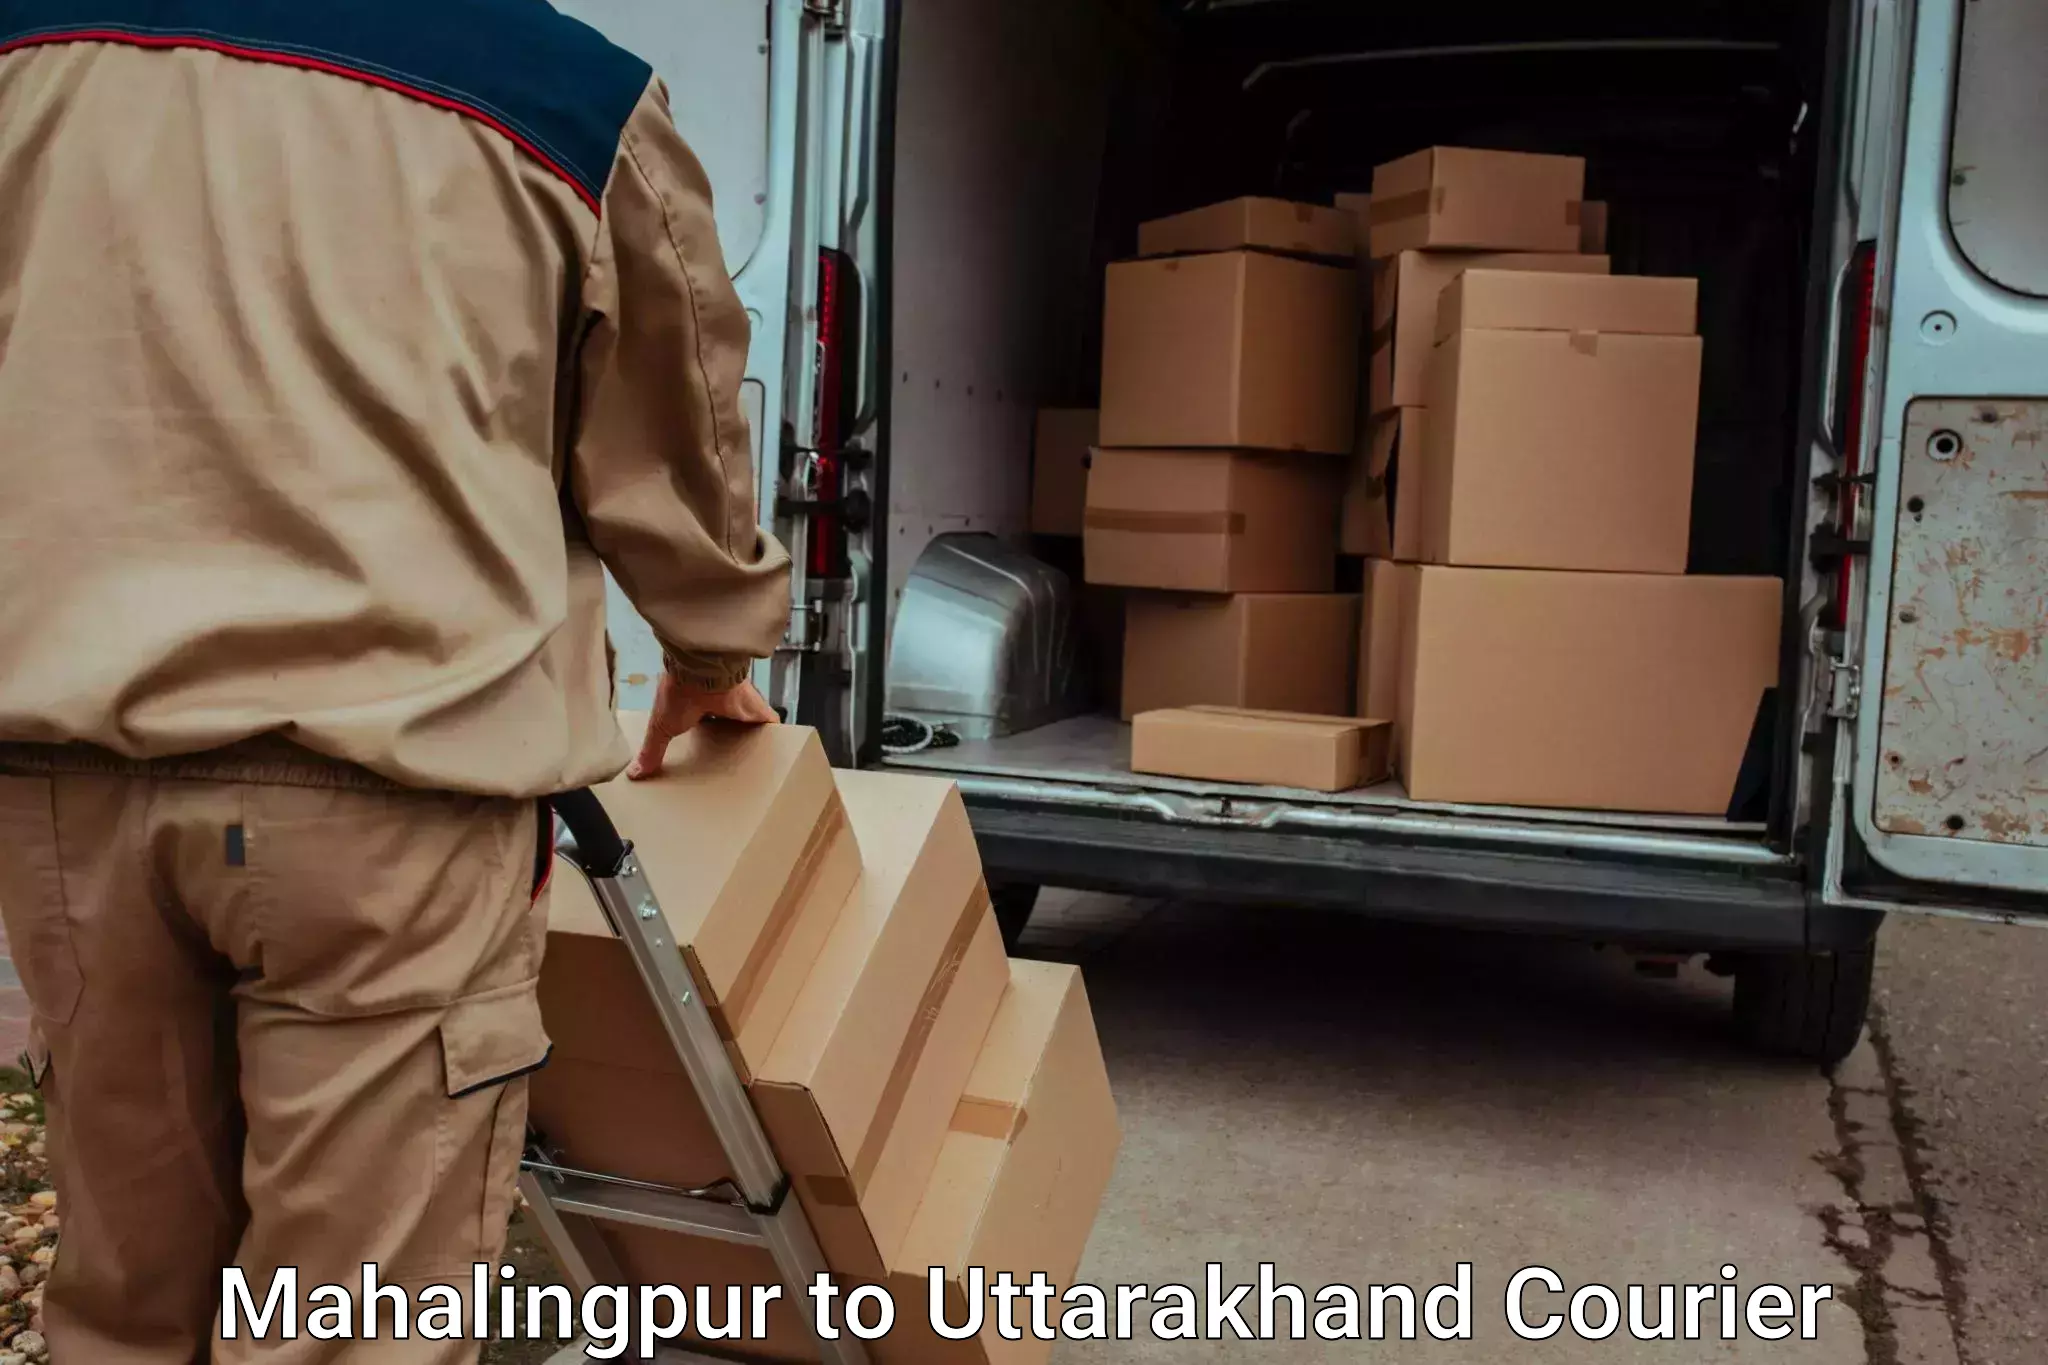 Stress-free household moving Mahalingpur to Lohaghat